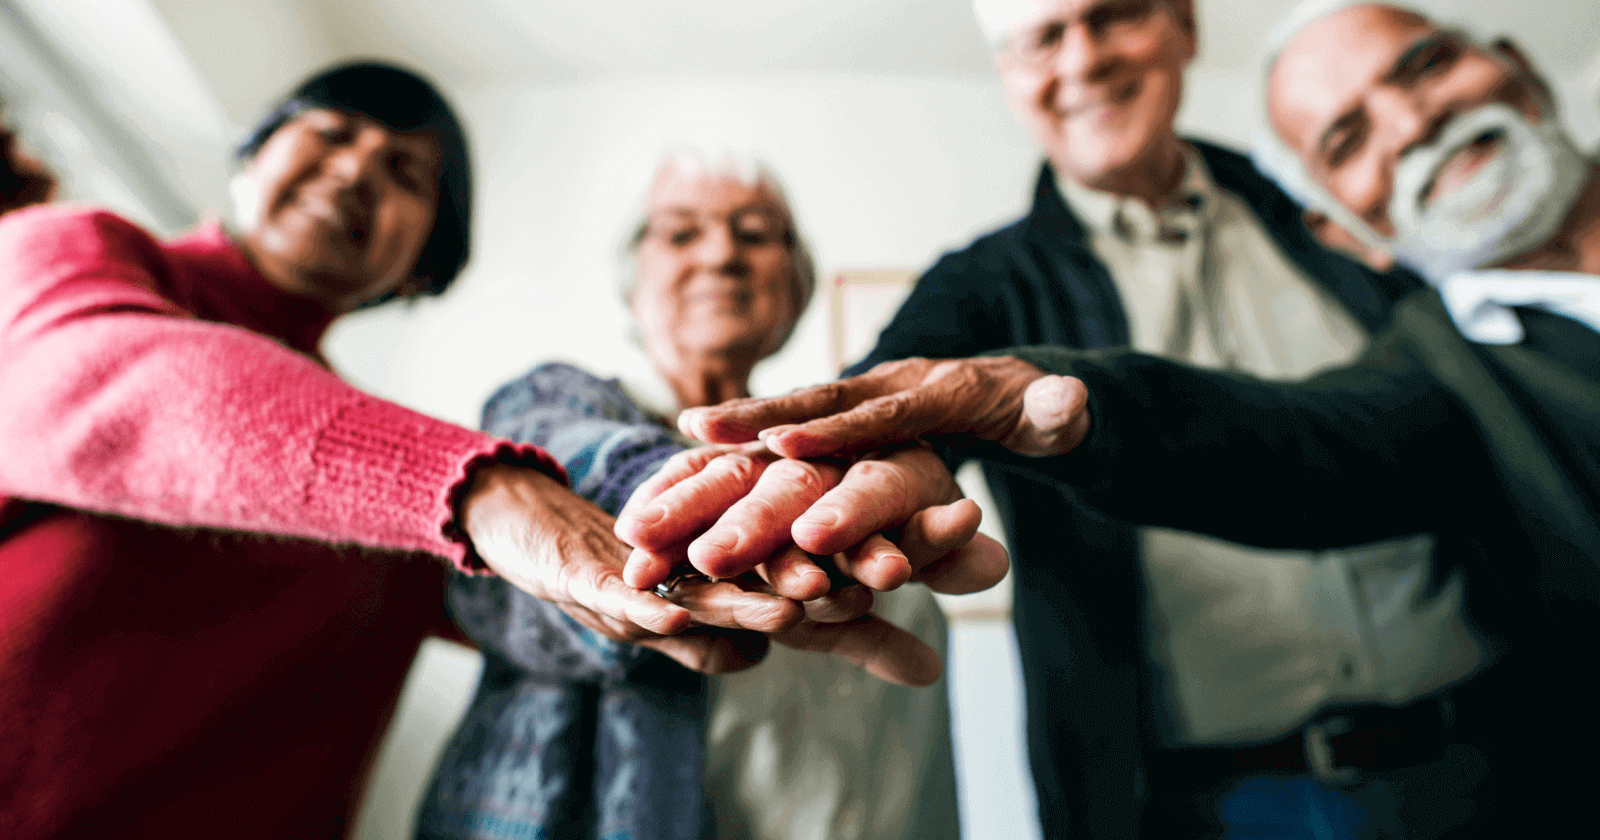 Socialization and Community for Seniors